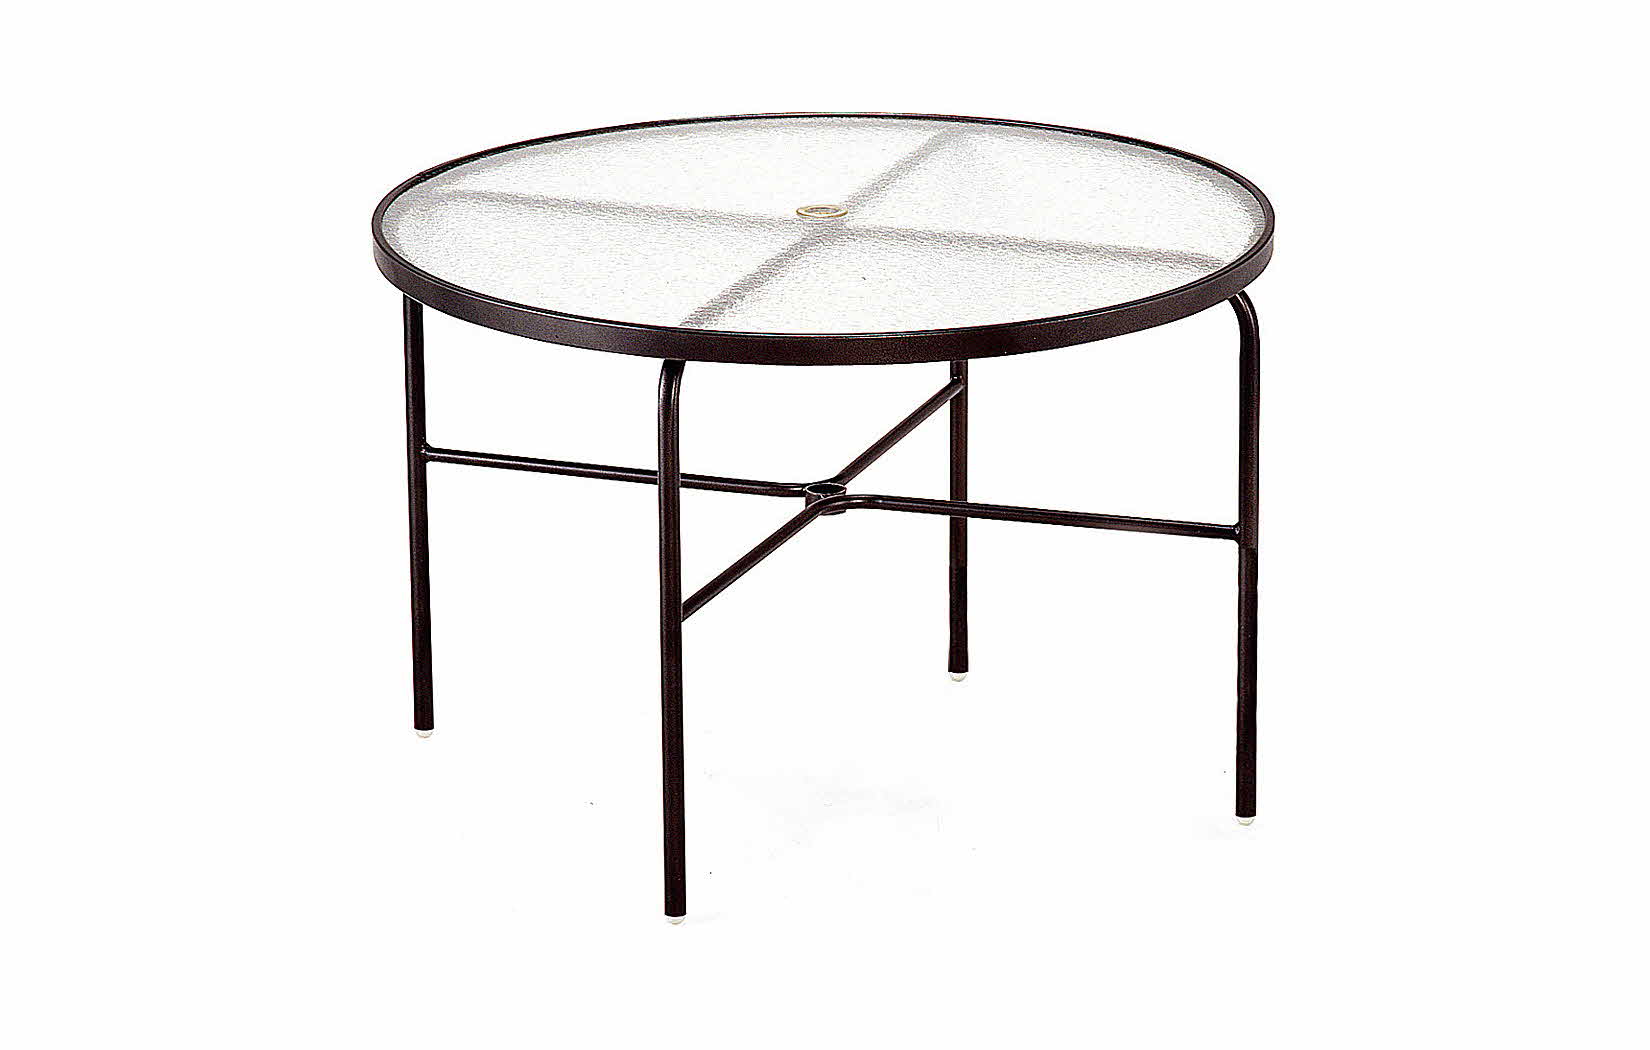 48 Inch Round Acrylic Top Outdoor Dining Table